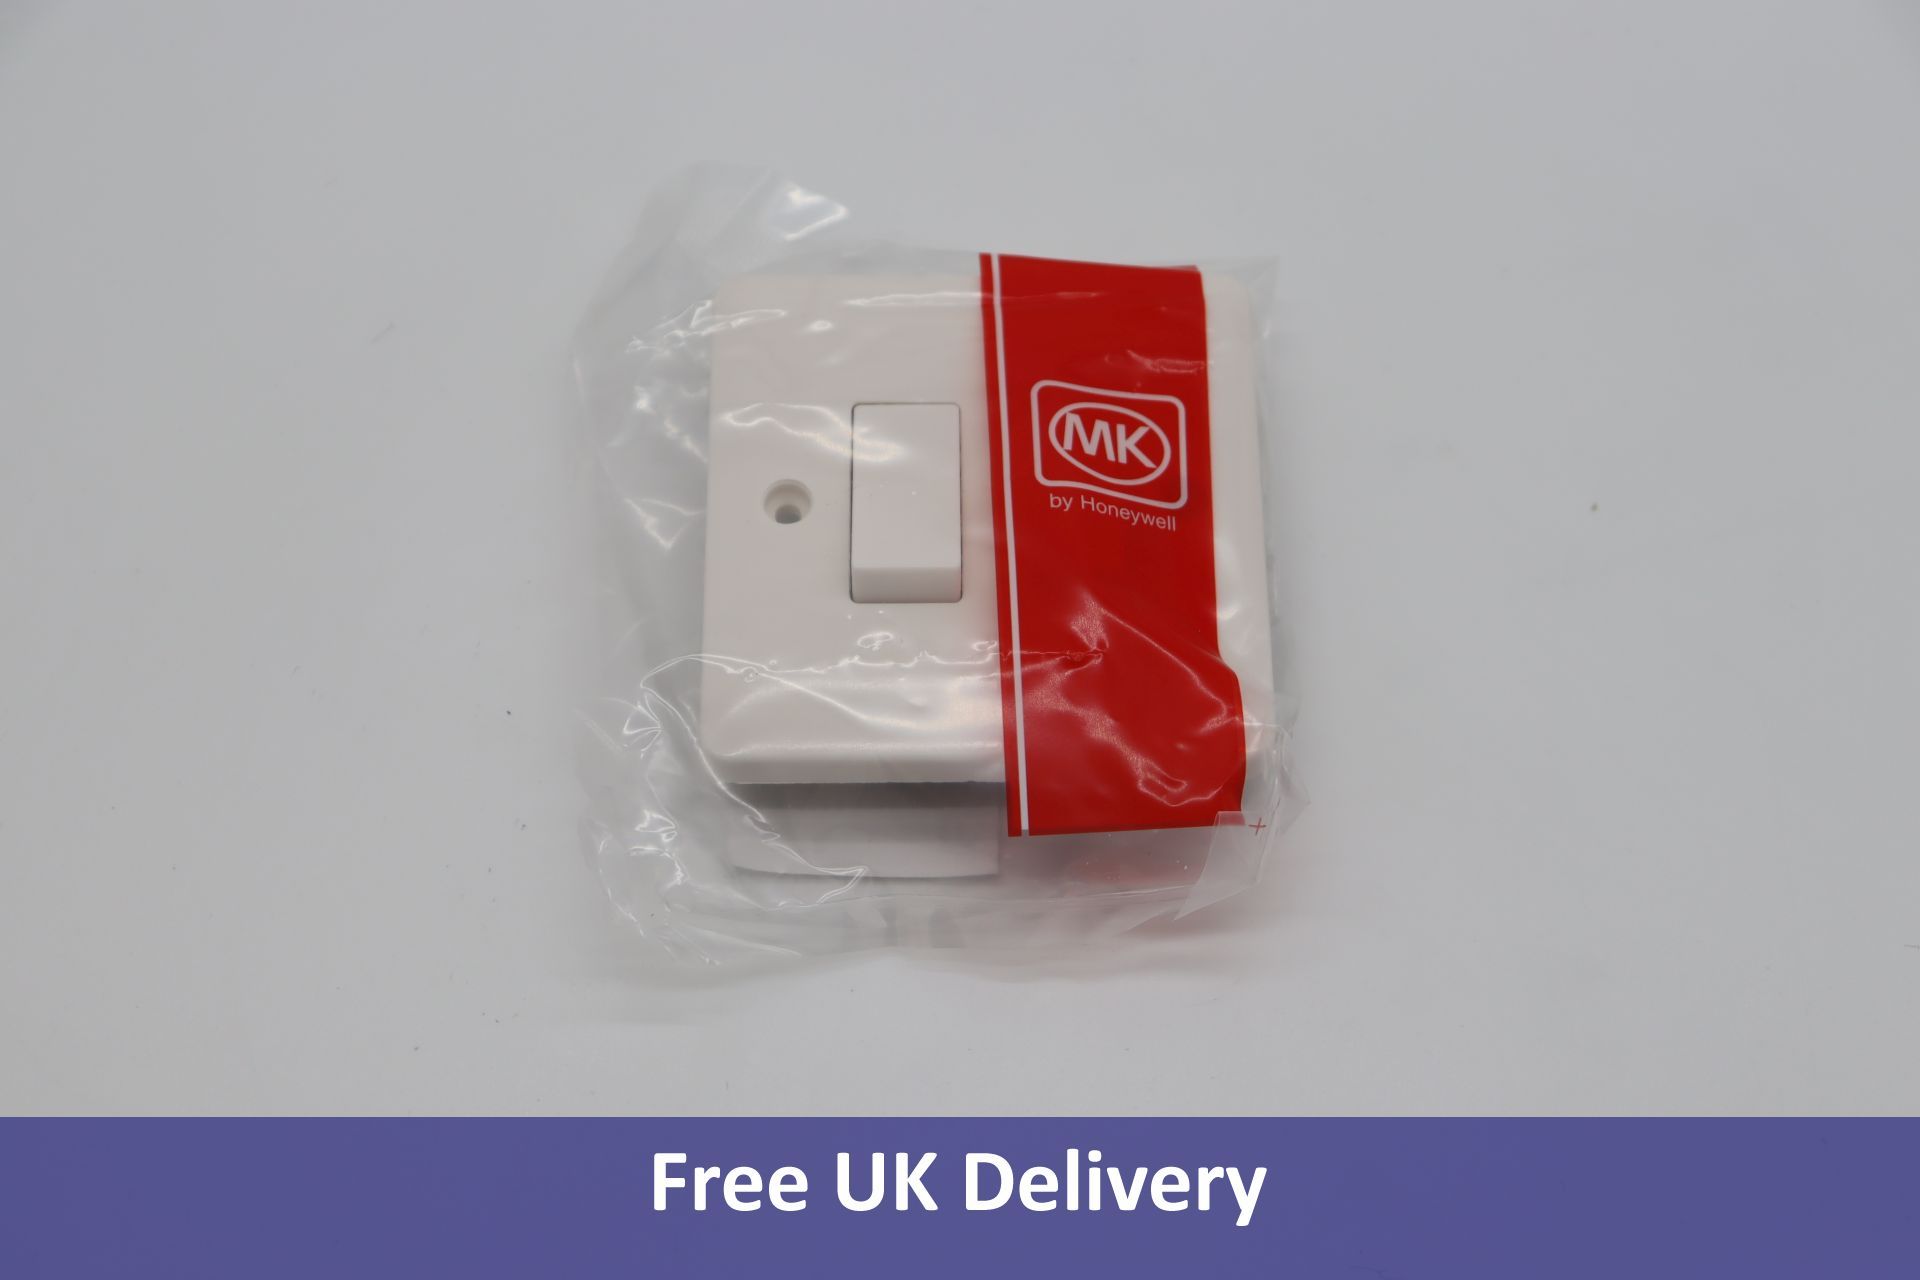 Five MK Electric Base White Moulded 2 Gang Single Pole Switched Socket 13A, 6 Pack, 1 x Base White M